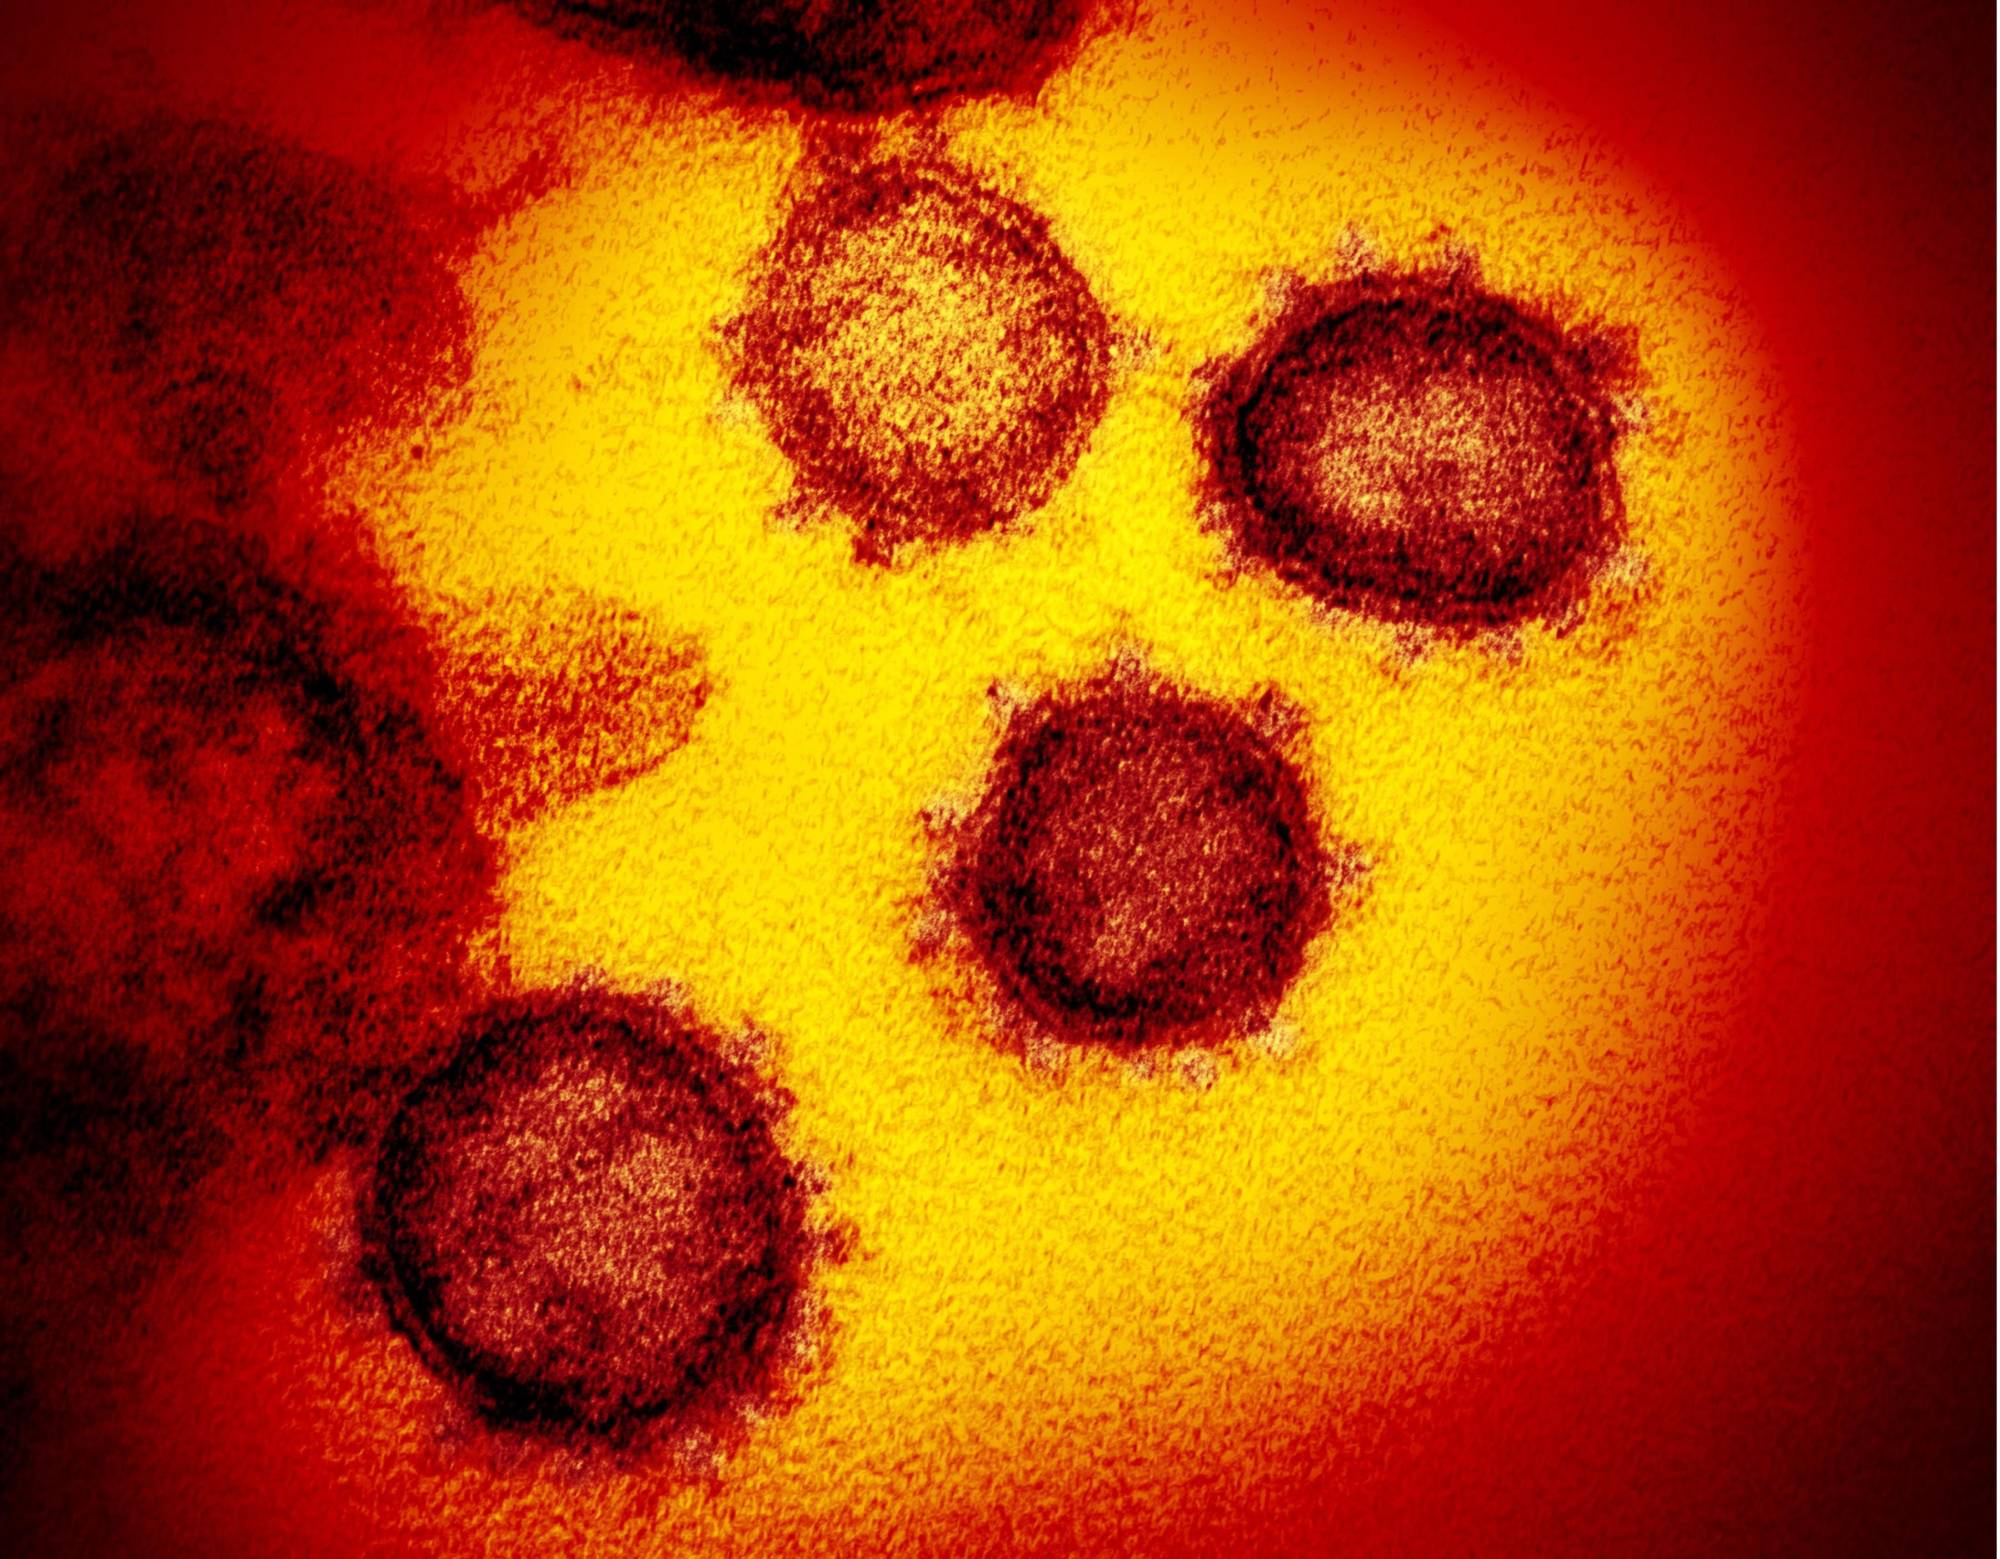 A sample of the novel coronavirus is shown in an electron micrograph. | U.S. NATIONAL INSTITUTE OF ALLERGY AND INFECTIOUS DISEASES / VIA KYODO